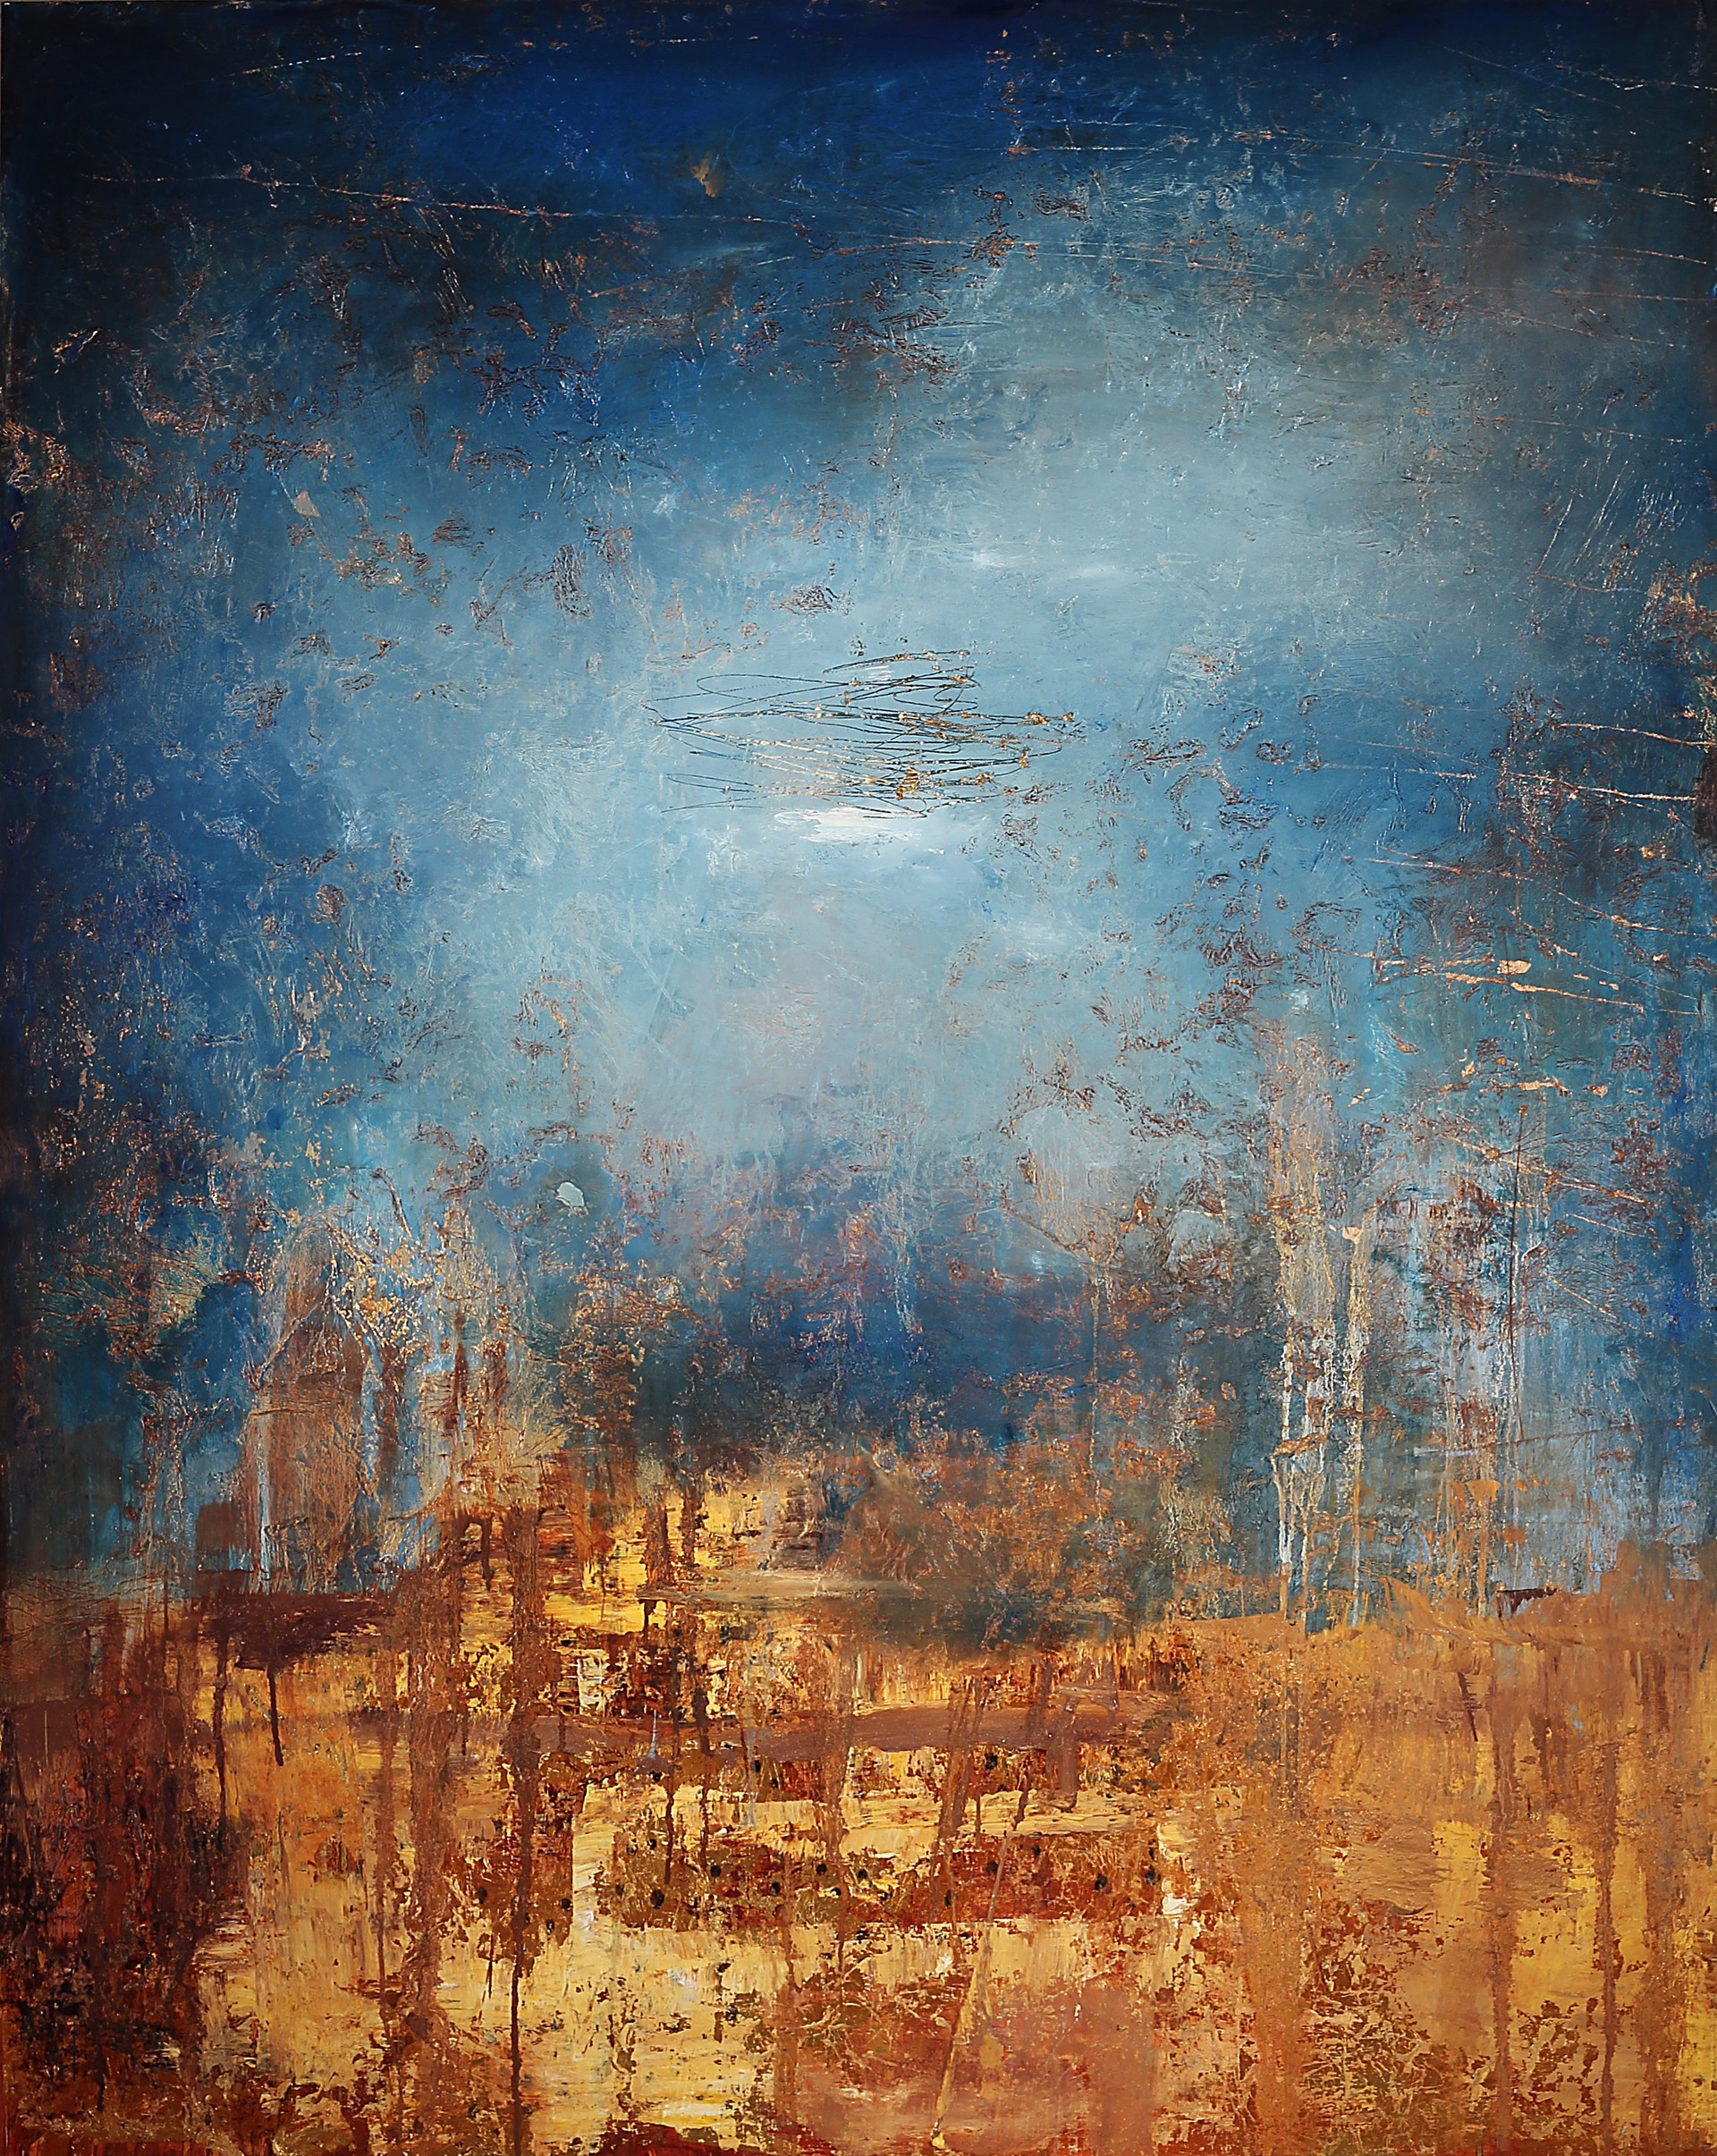 There Is Another Sky II (SOLD) by MATT FLINT